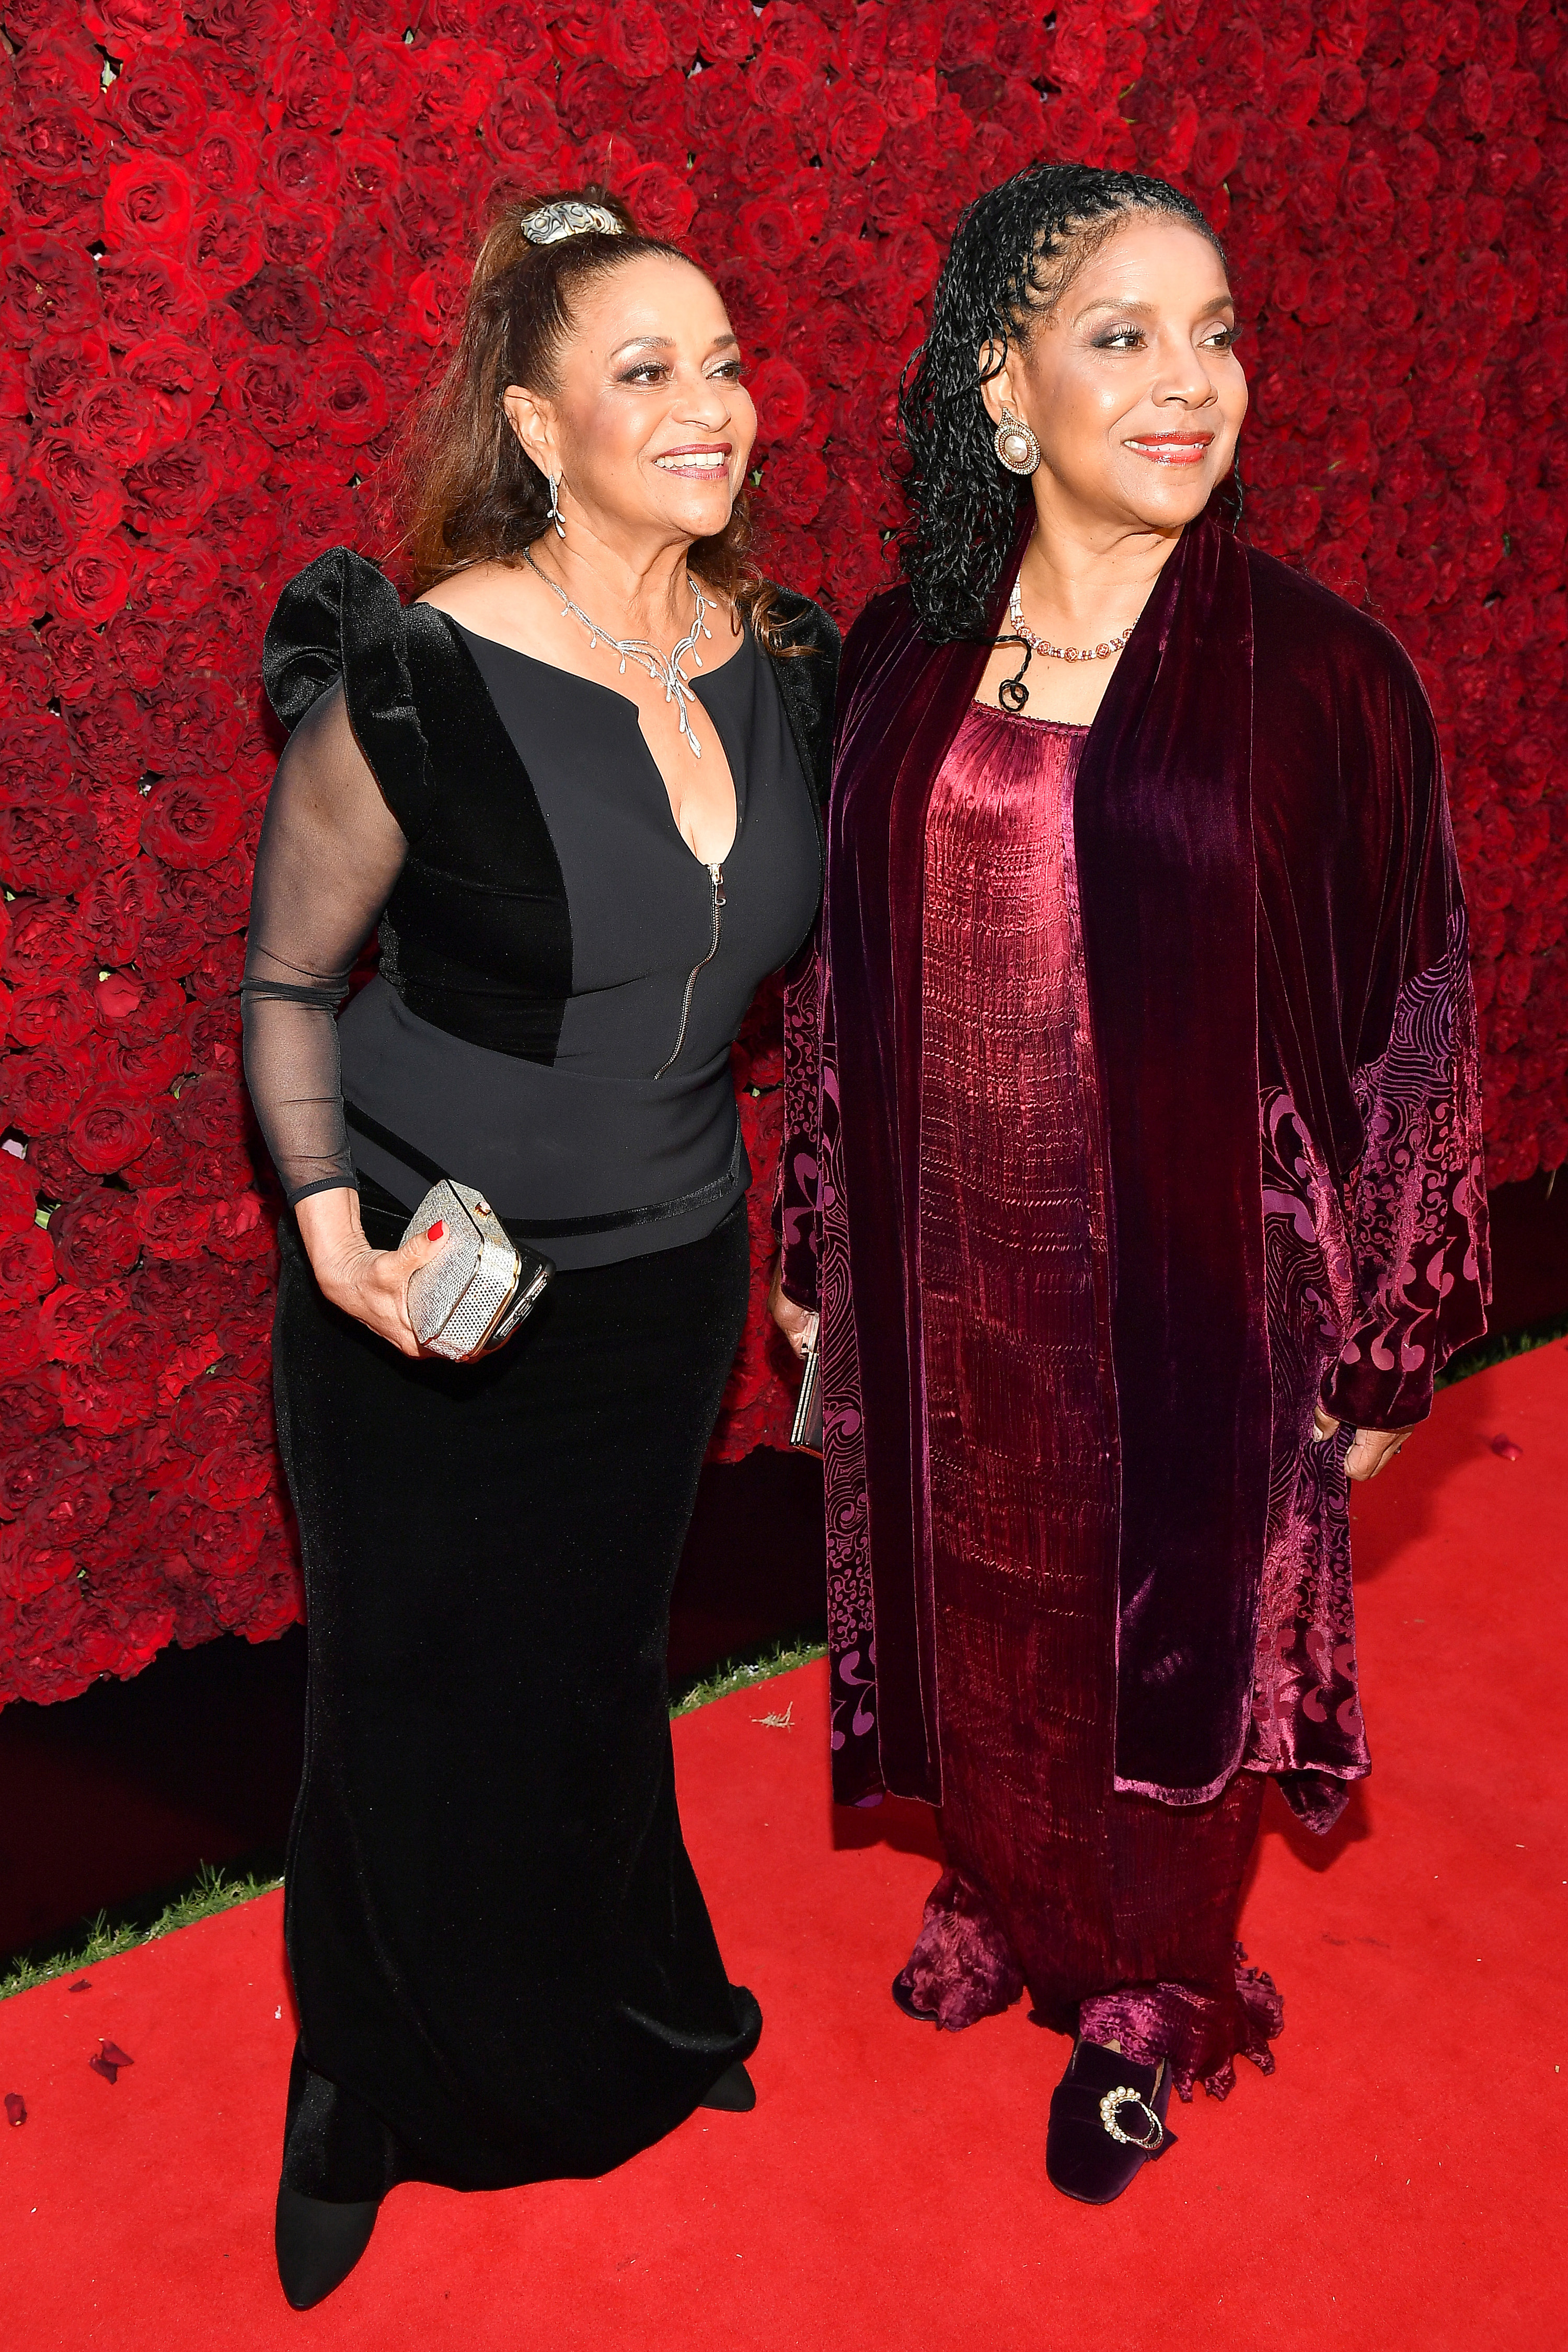 Debbie Allen and Phylicia Rashad smiling on the red carpet